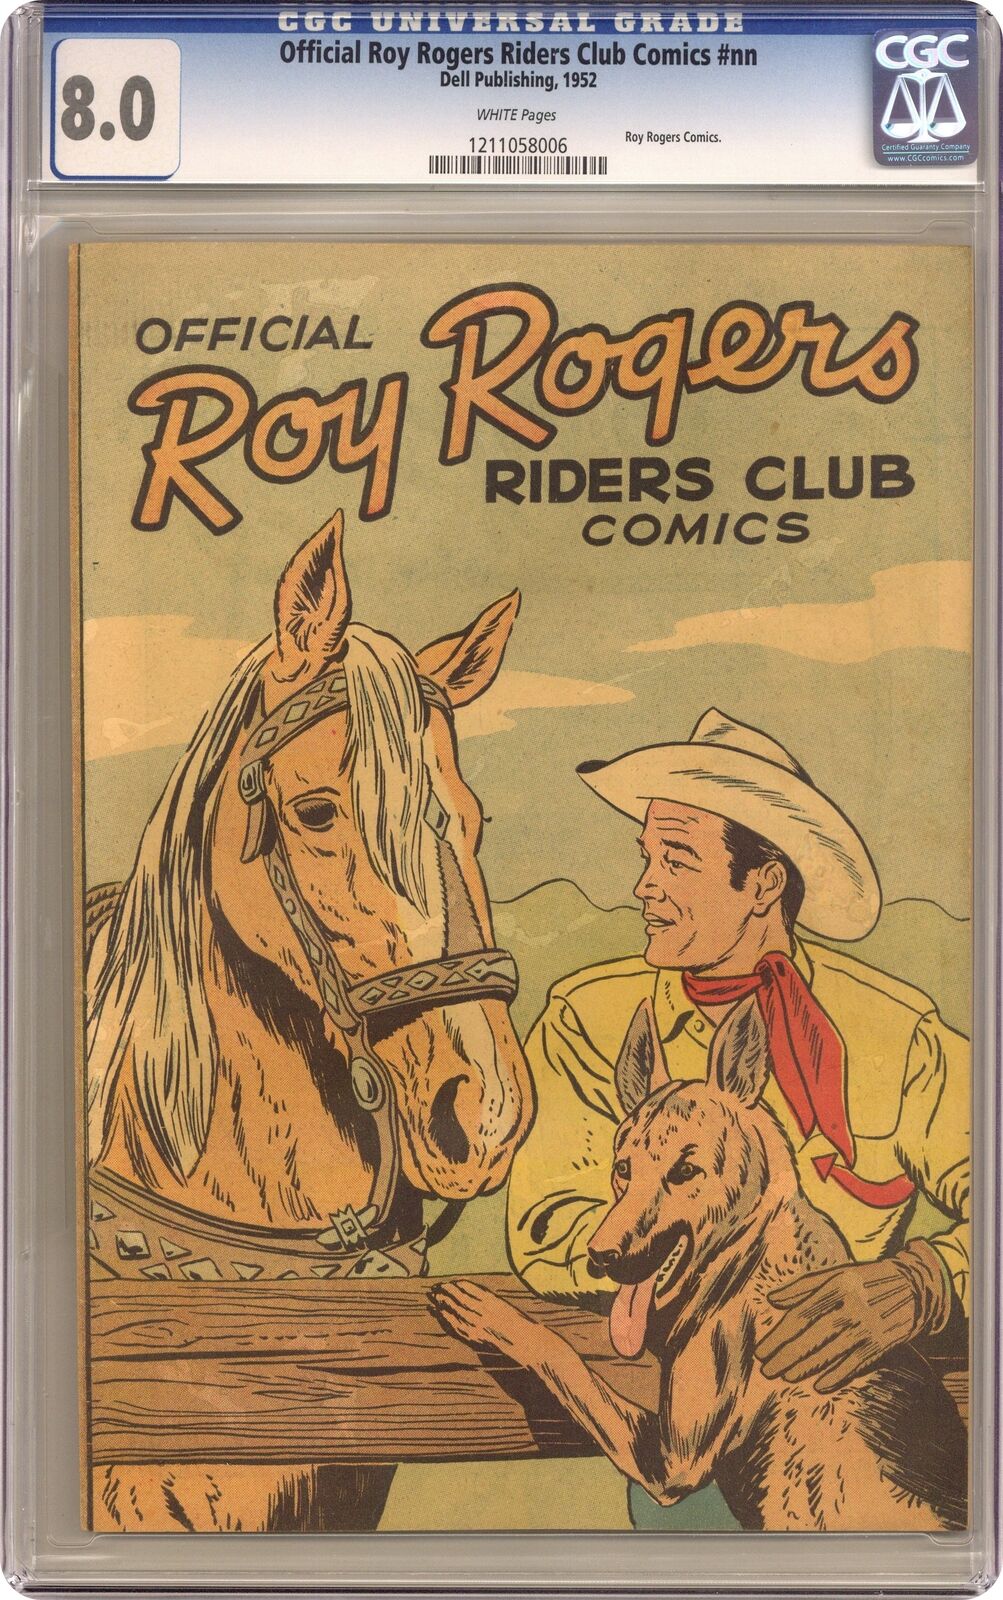 Official Roy Rogers Riders Club Comics #0 CGC 8.0 1952 1211058006